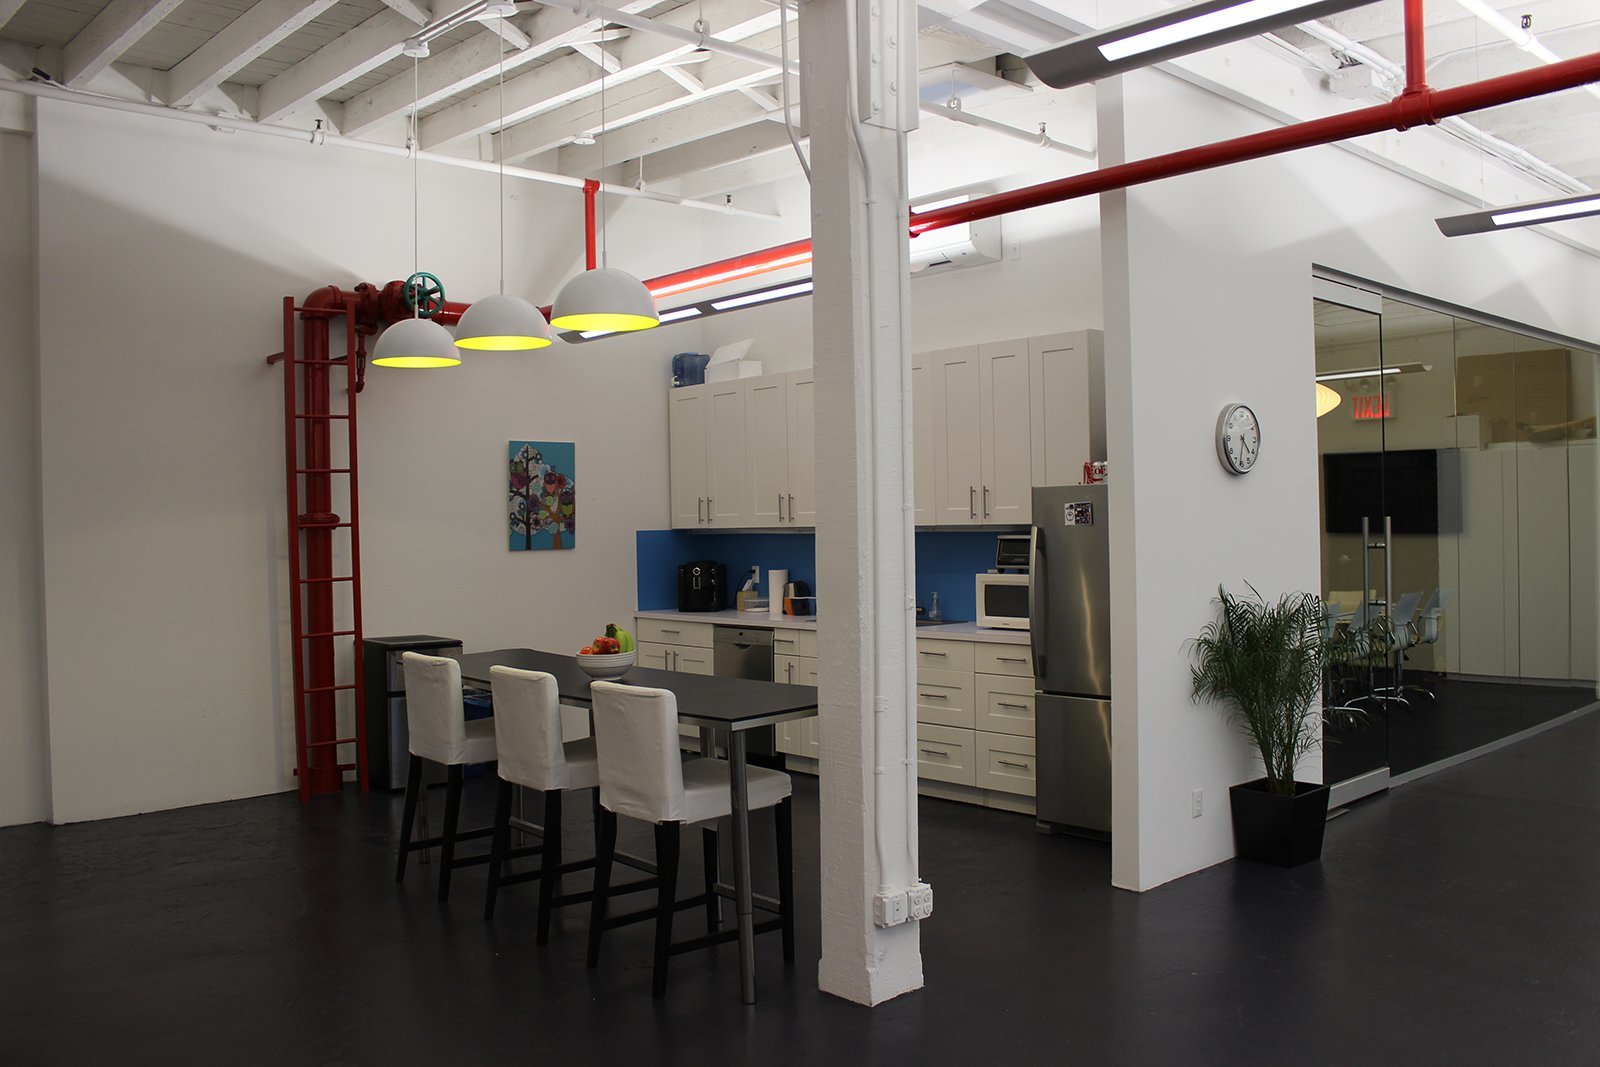 Kitchen – the heart and social area of the office